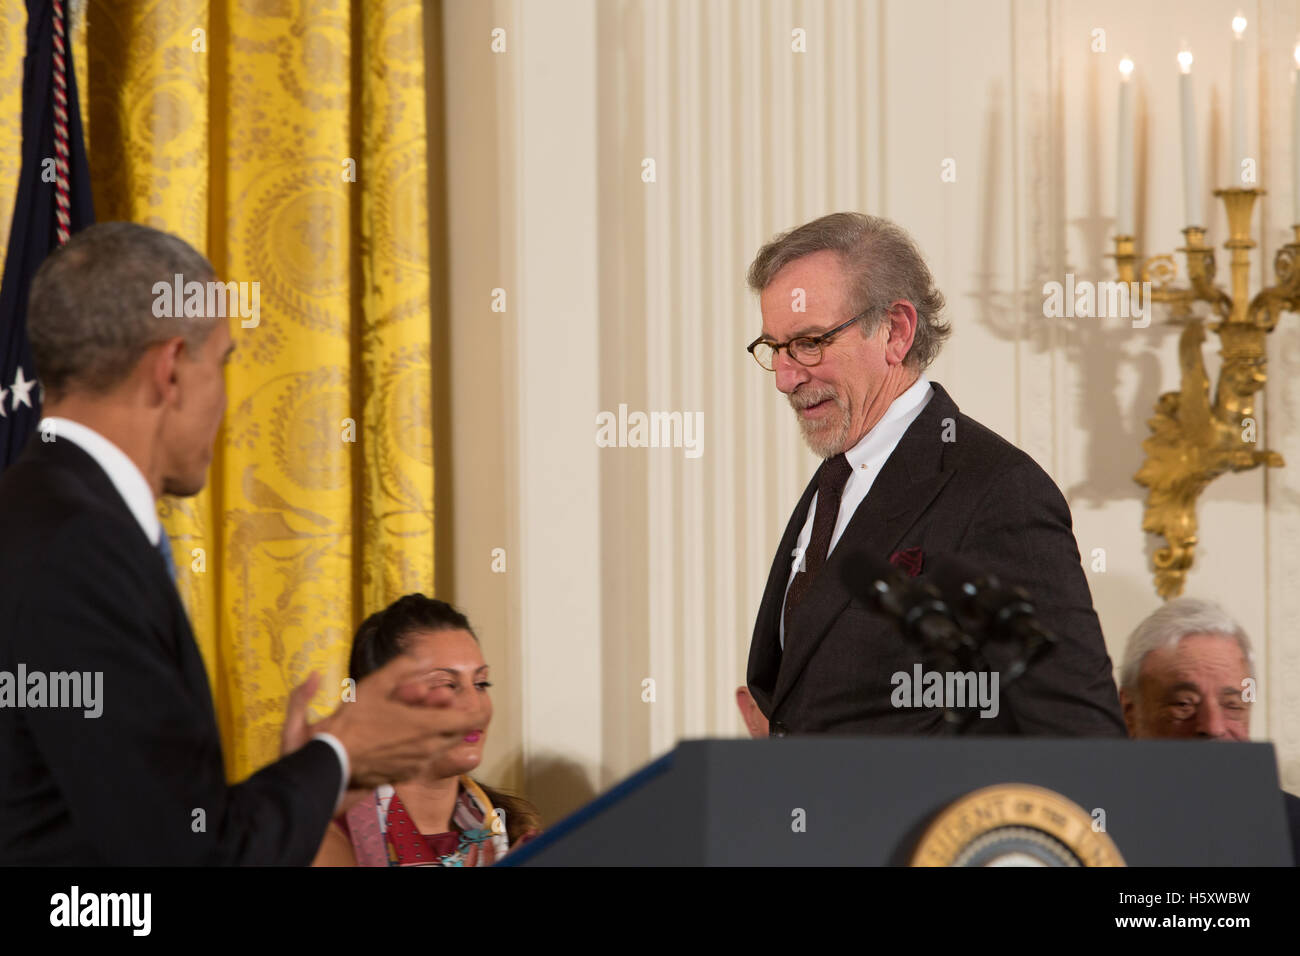 Steven Spielberg receives the Presidential Medal of Freedom Award from U.S. President Barack Obama at the White House in Washinton DC on November 24th, 2015 Stock Photo